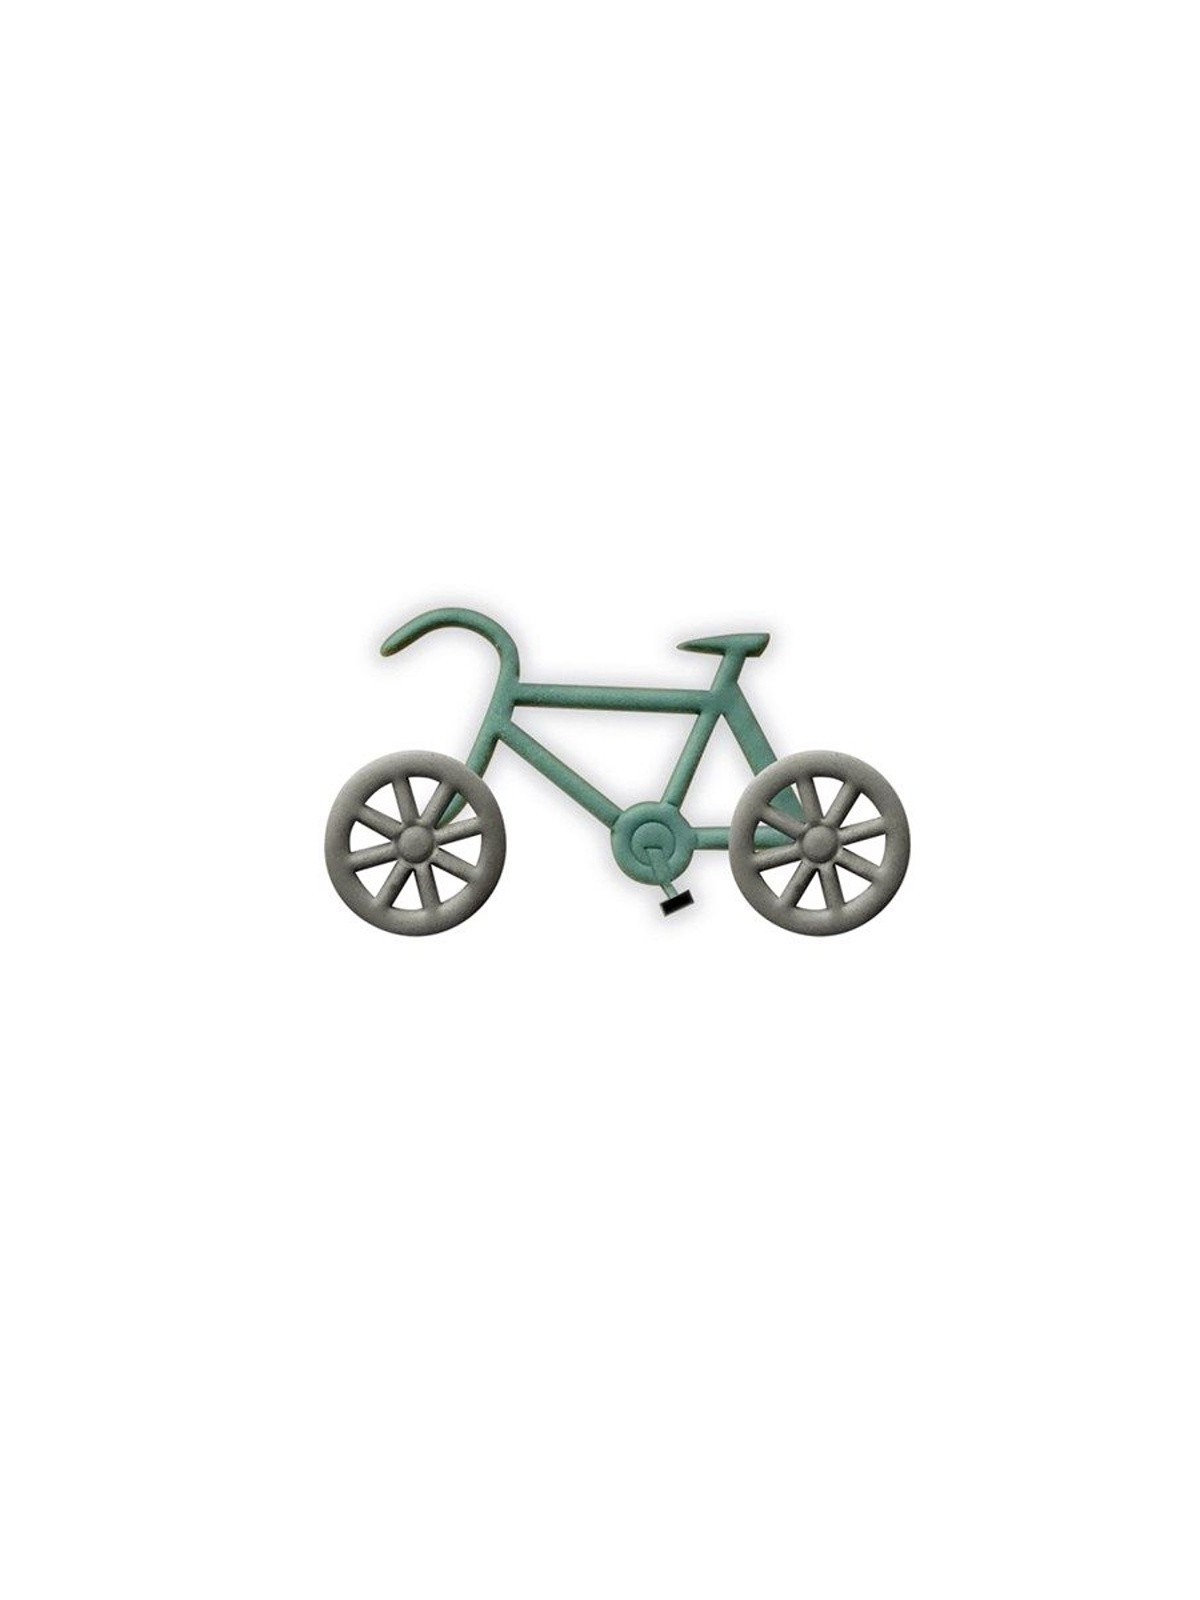 Cutters - bicycle - 2pcs